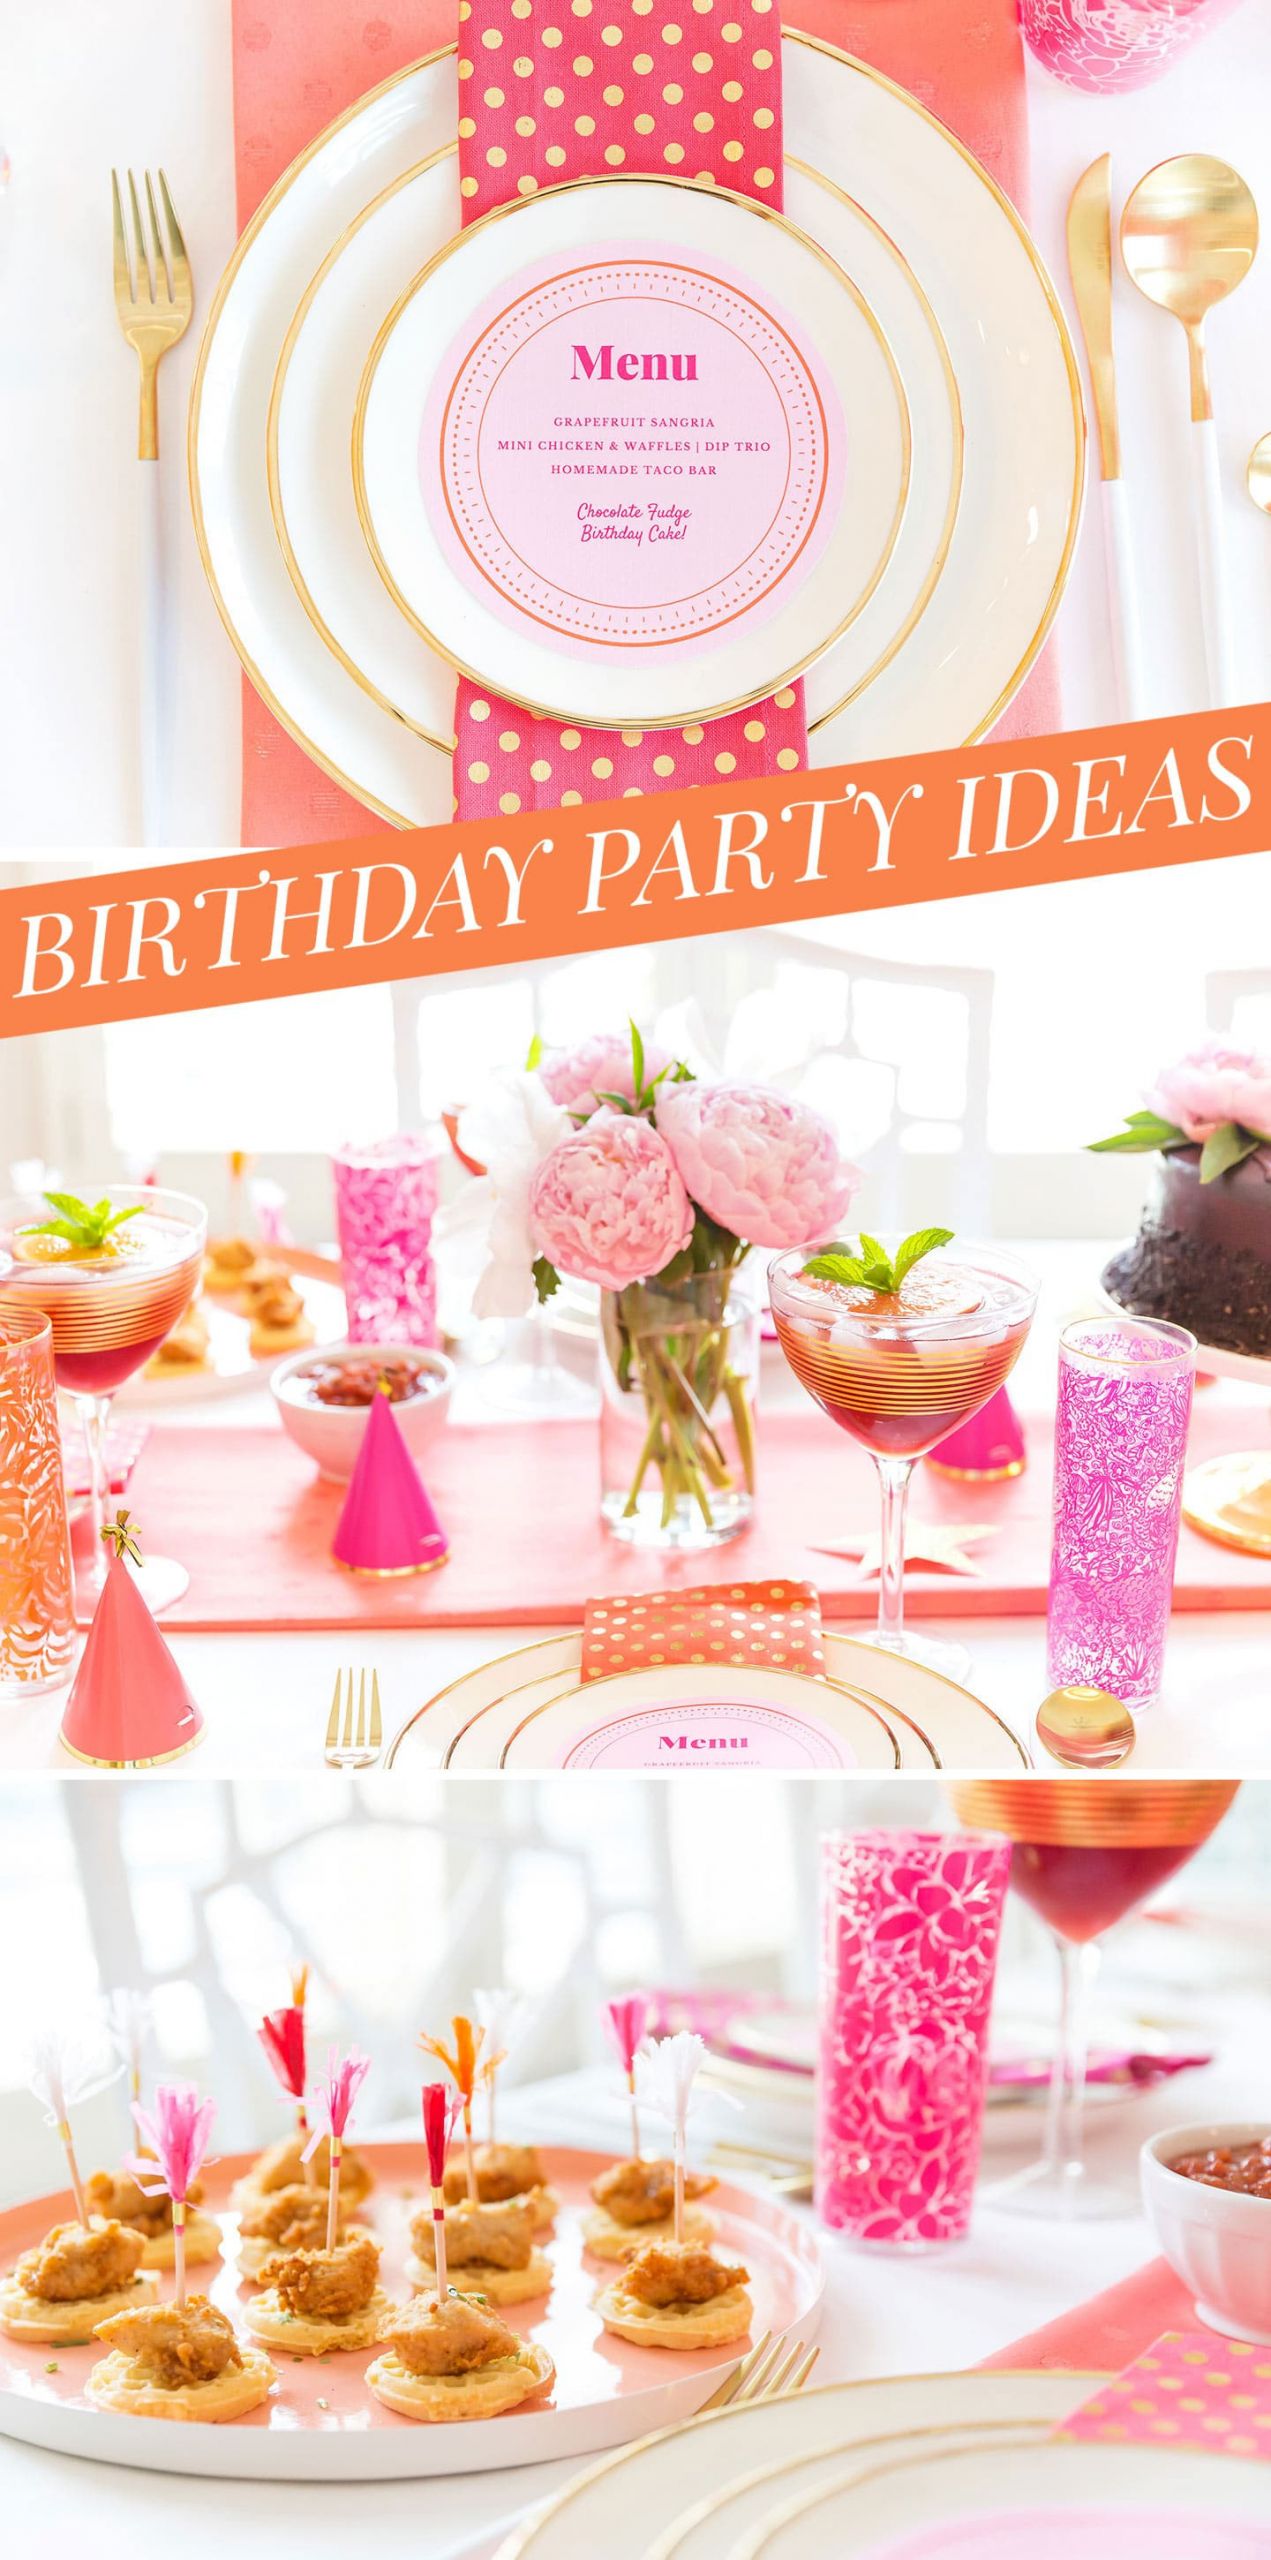 Birthday Party Decorations Ideas For Adults
 Creative Adult Birthday Party Ideas for the Girls